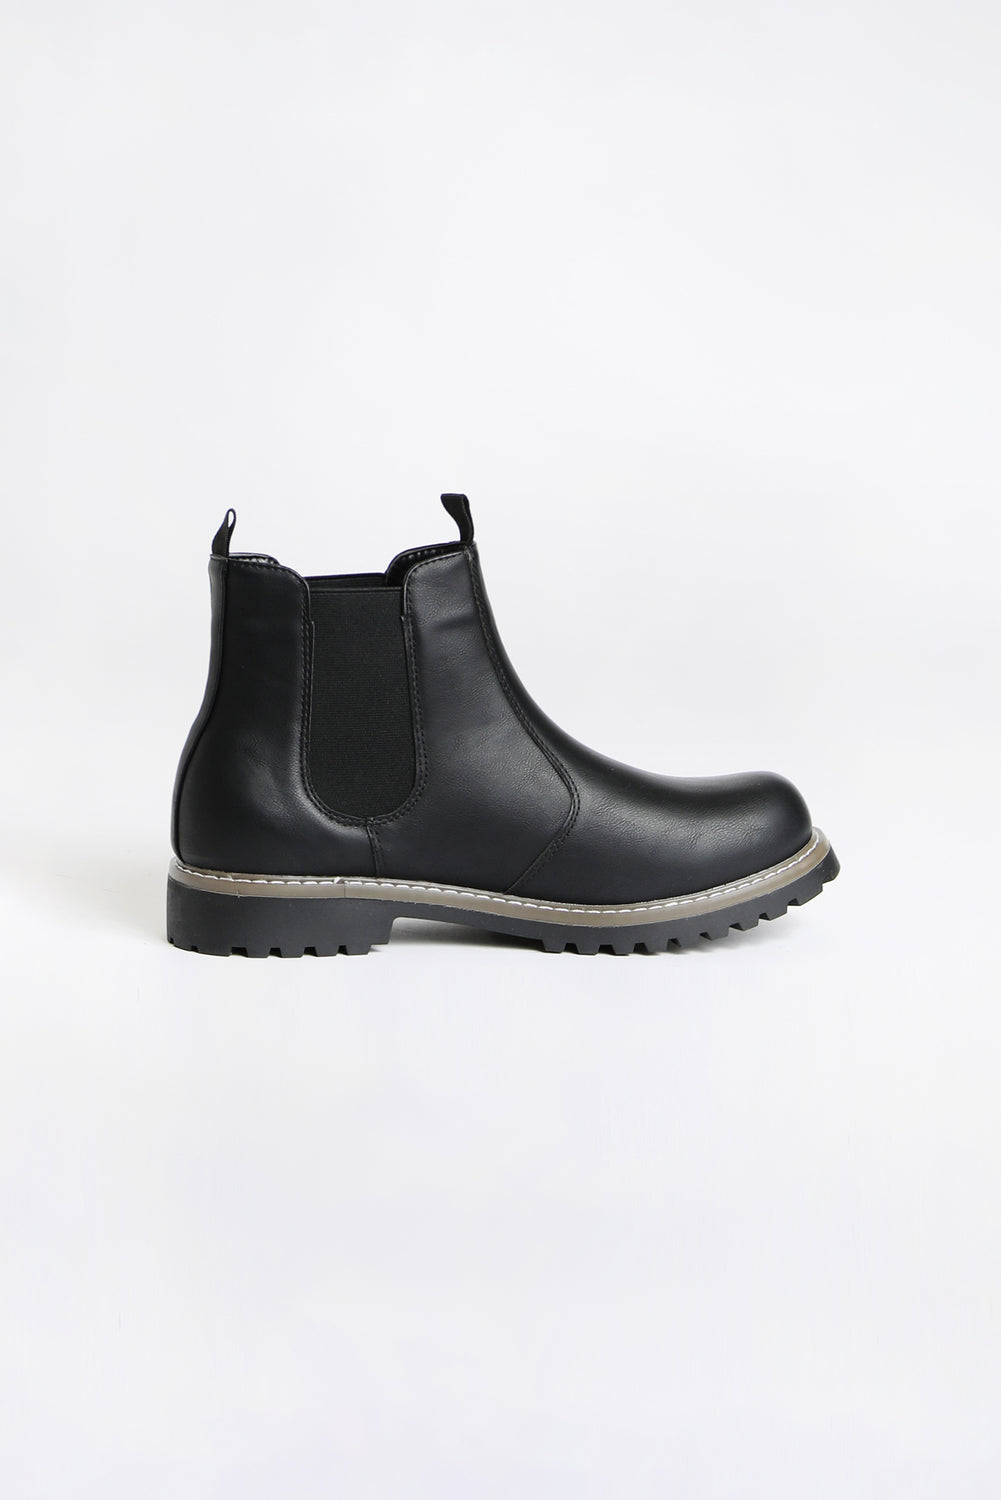 Youth Faux Fur Lined Chelsea Boots Youth Faux Fur Lined Chelsea Boots